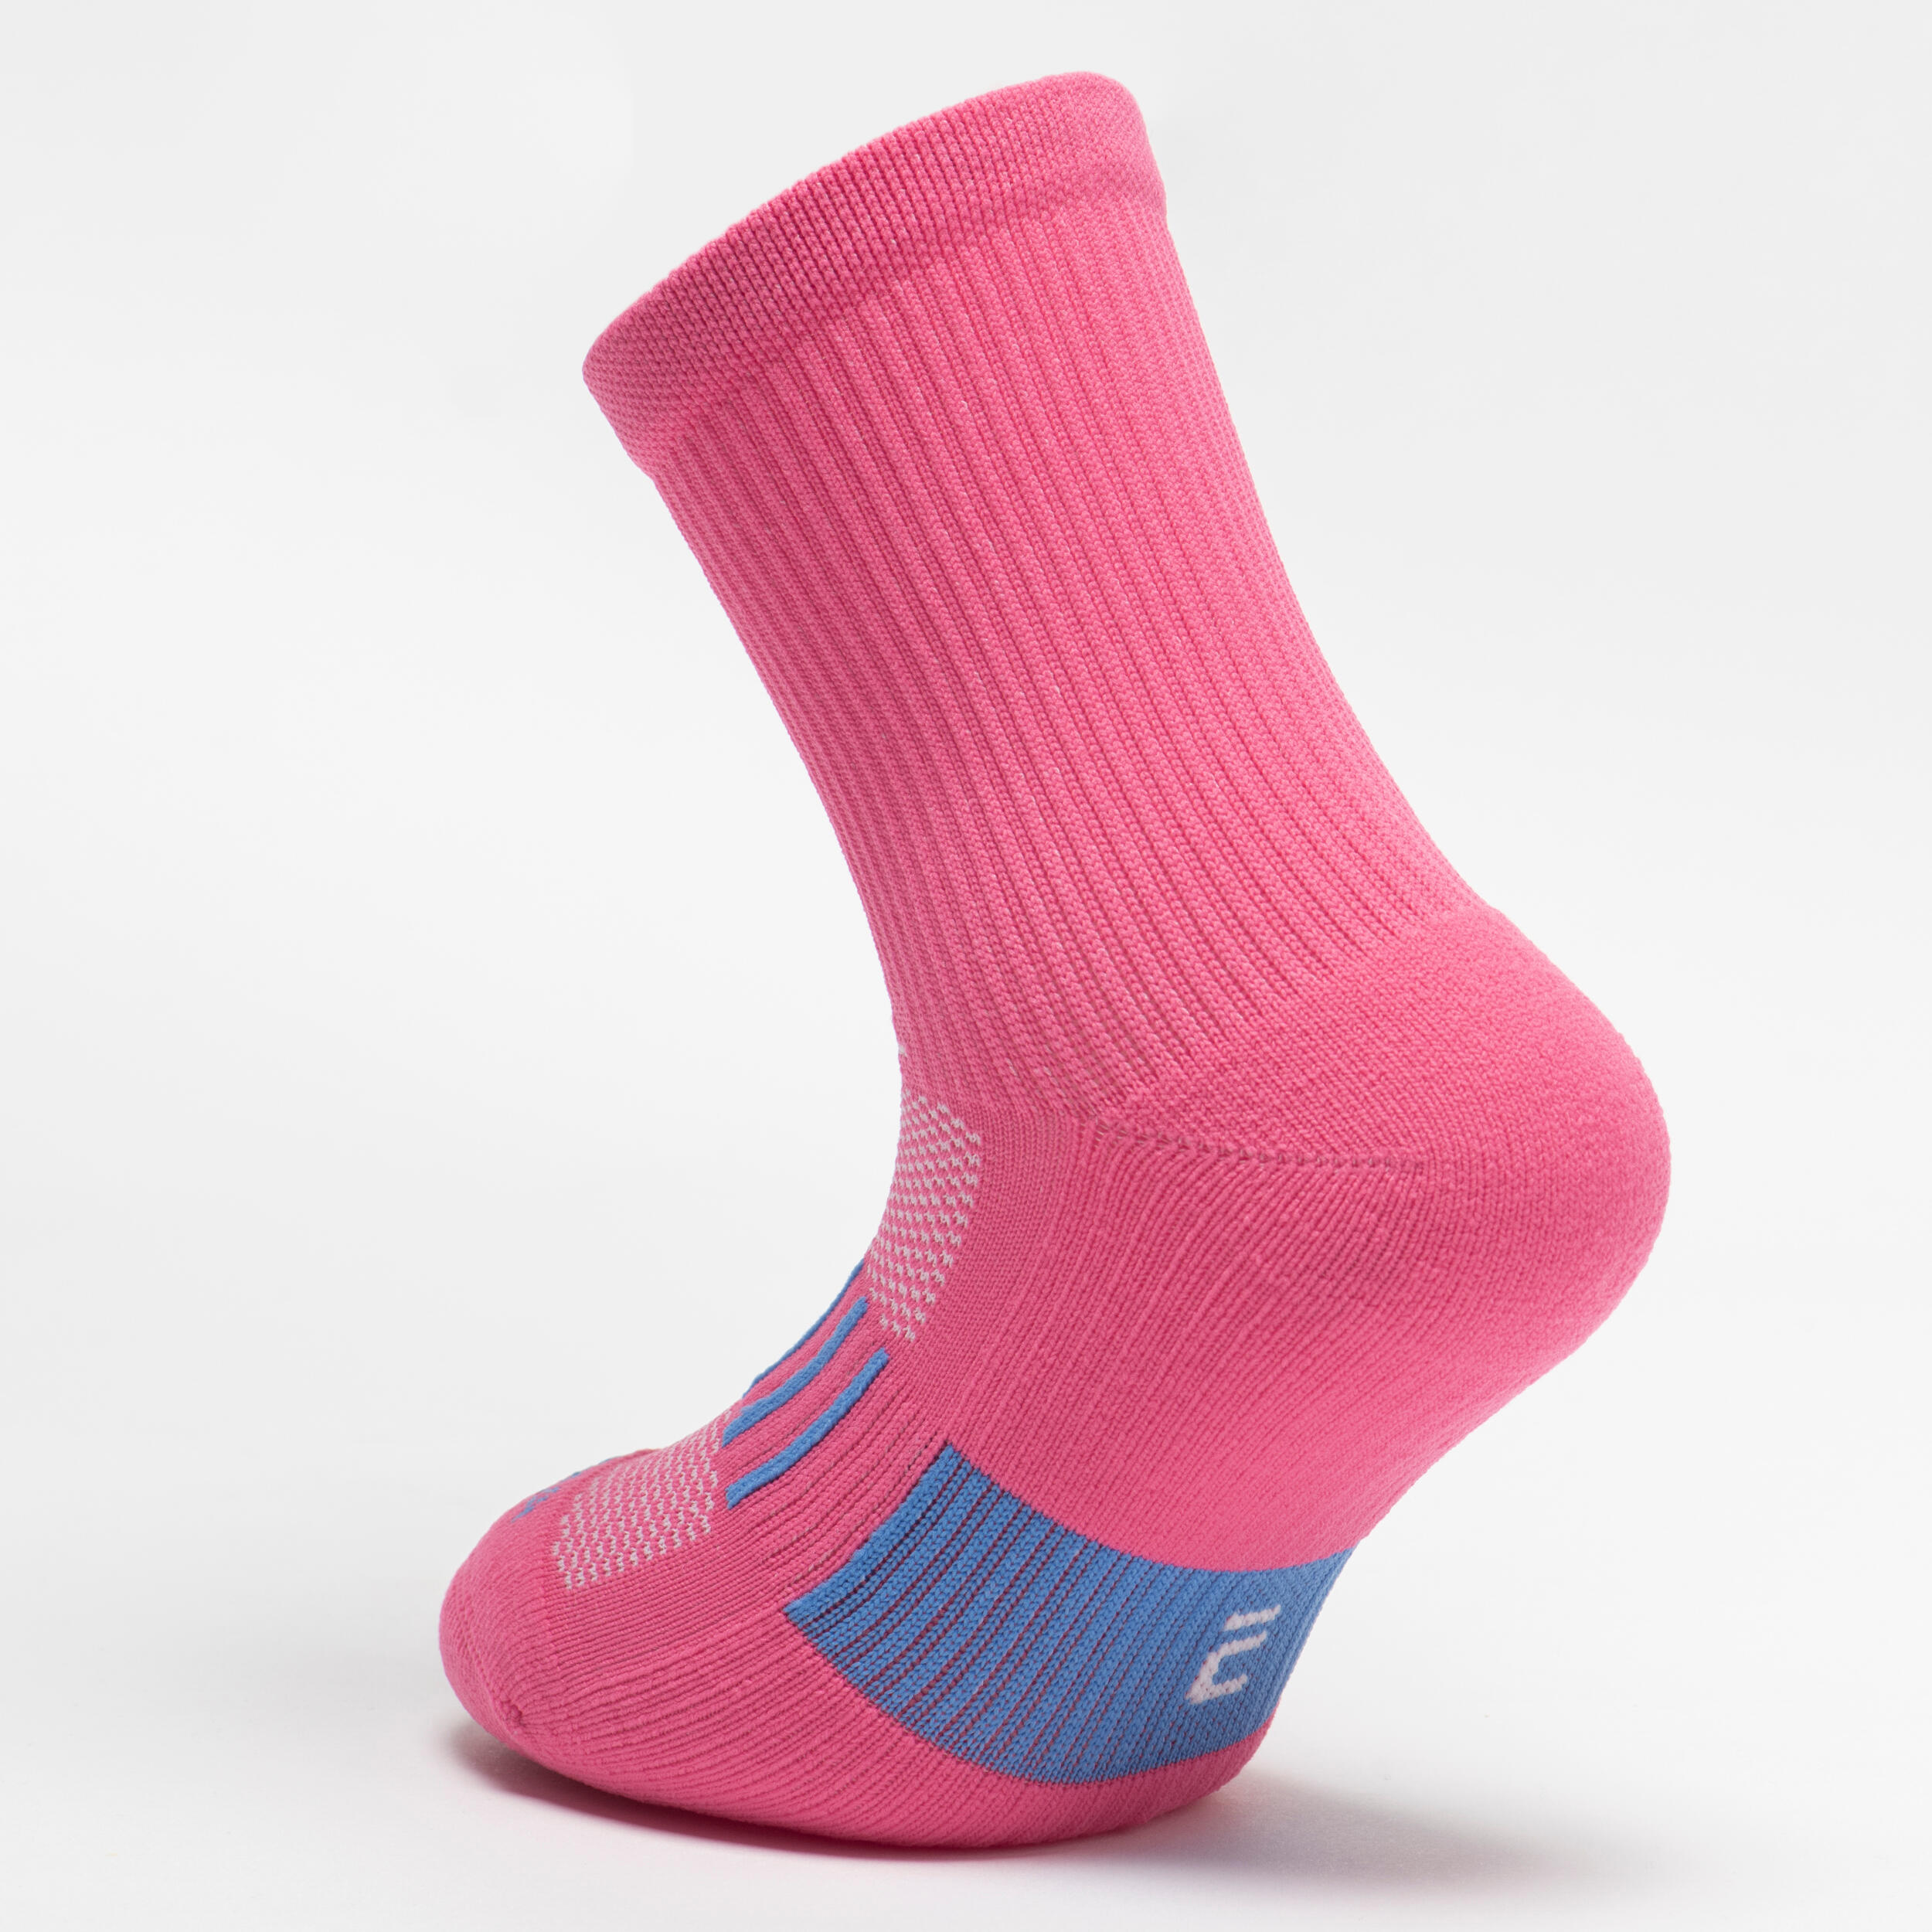 Kids' Socks AT 500 Mid 2-Pack - Plain Pink and White Pink Blue Stripes 10/13